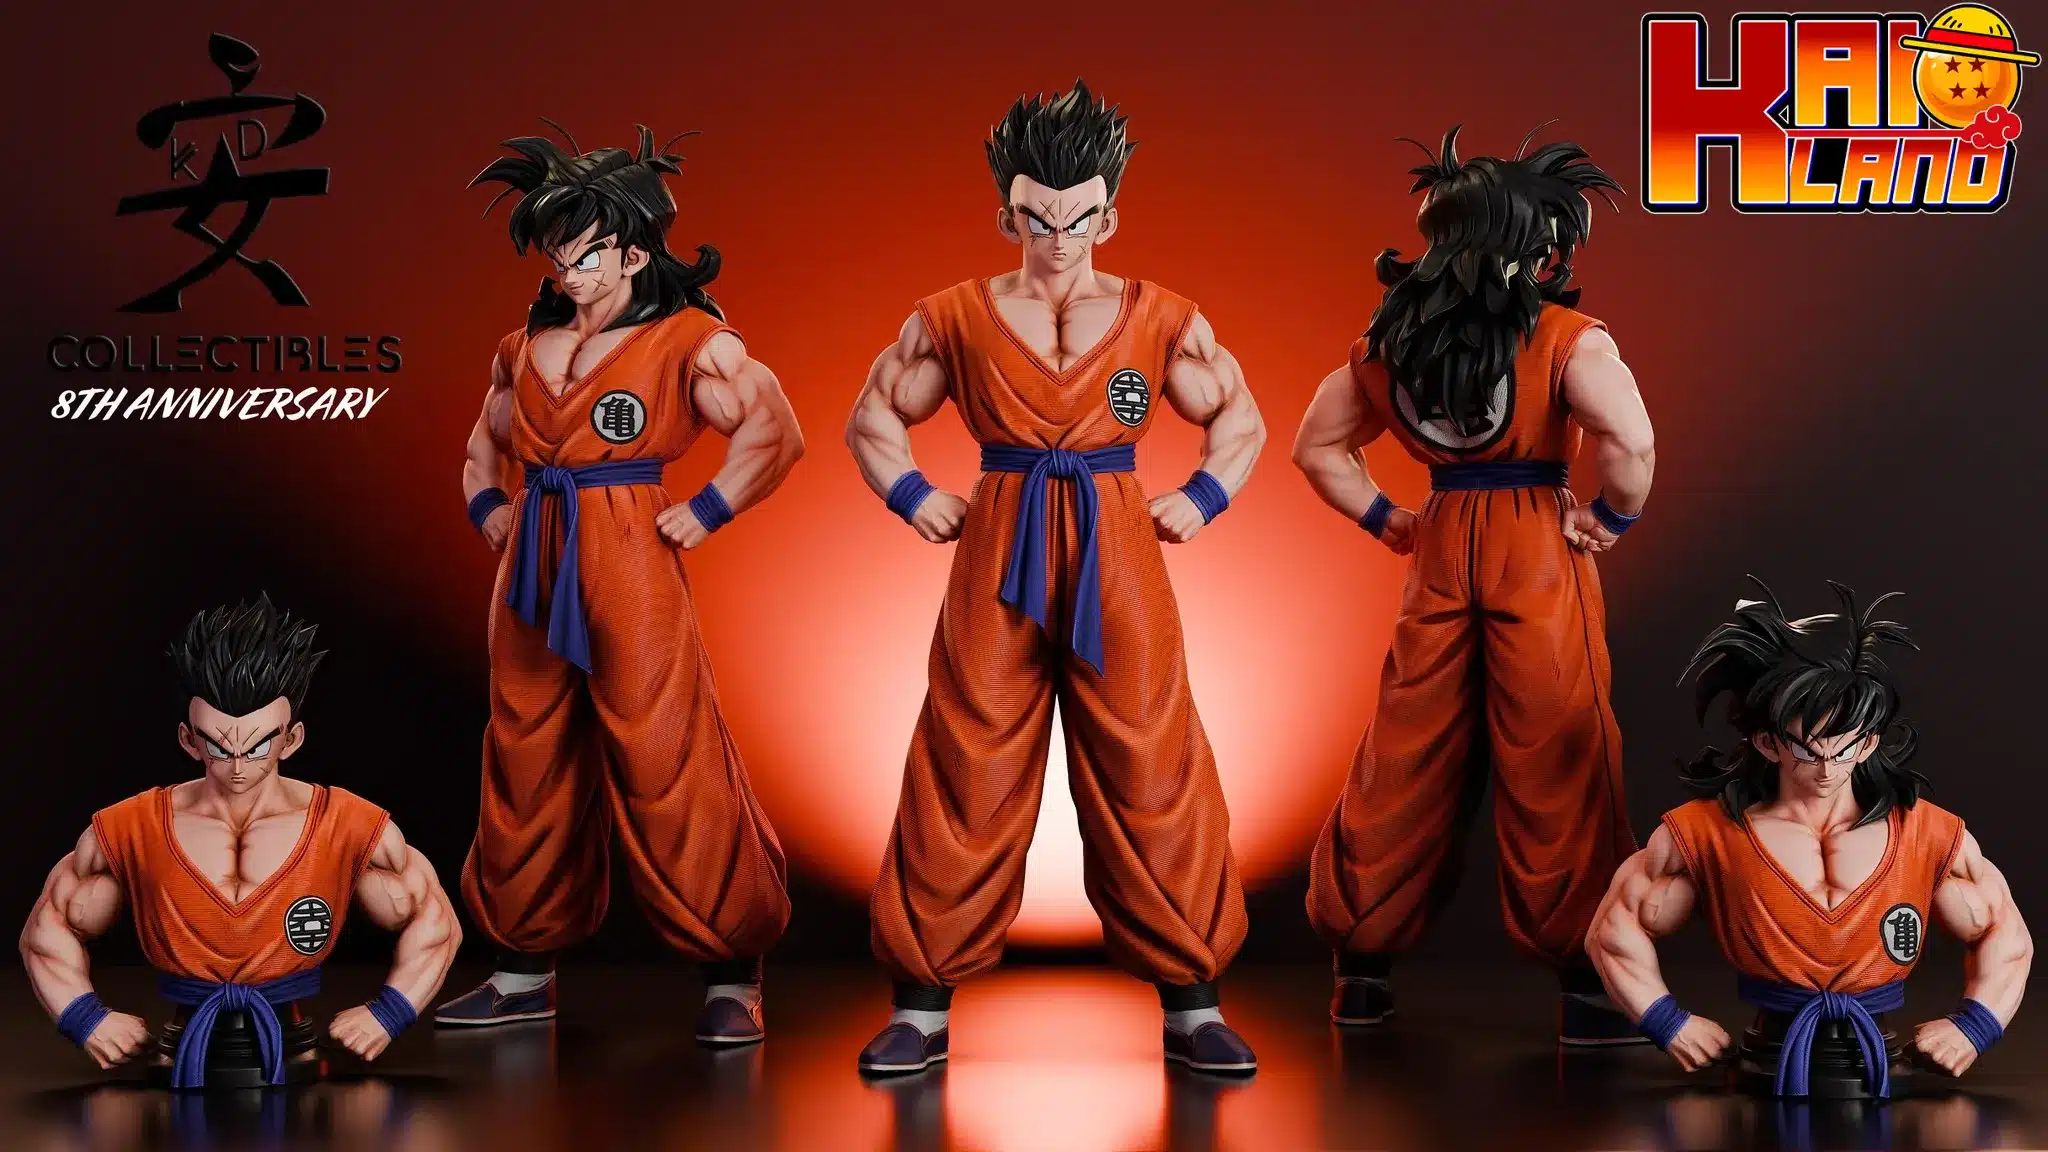 Dragon-Ball-KD-Collectibles-Z-Fighters-Resin-Statue-21-jpg.png